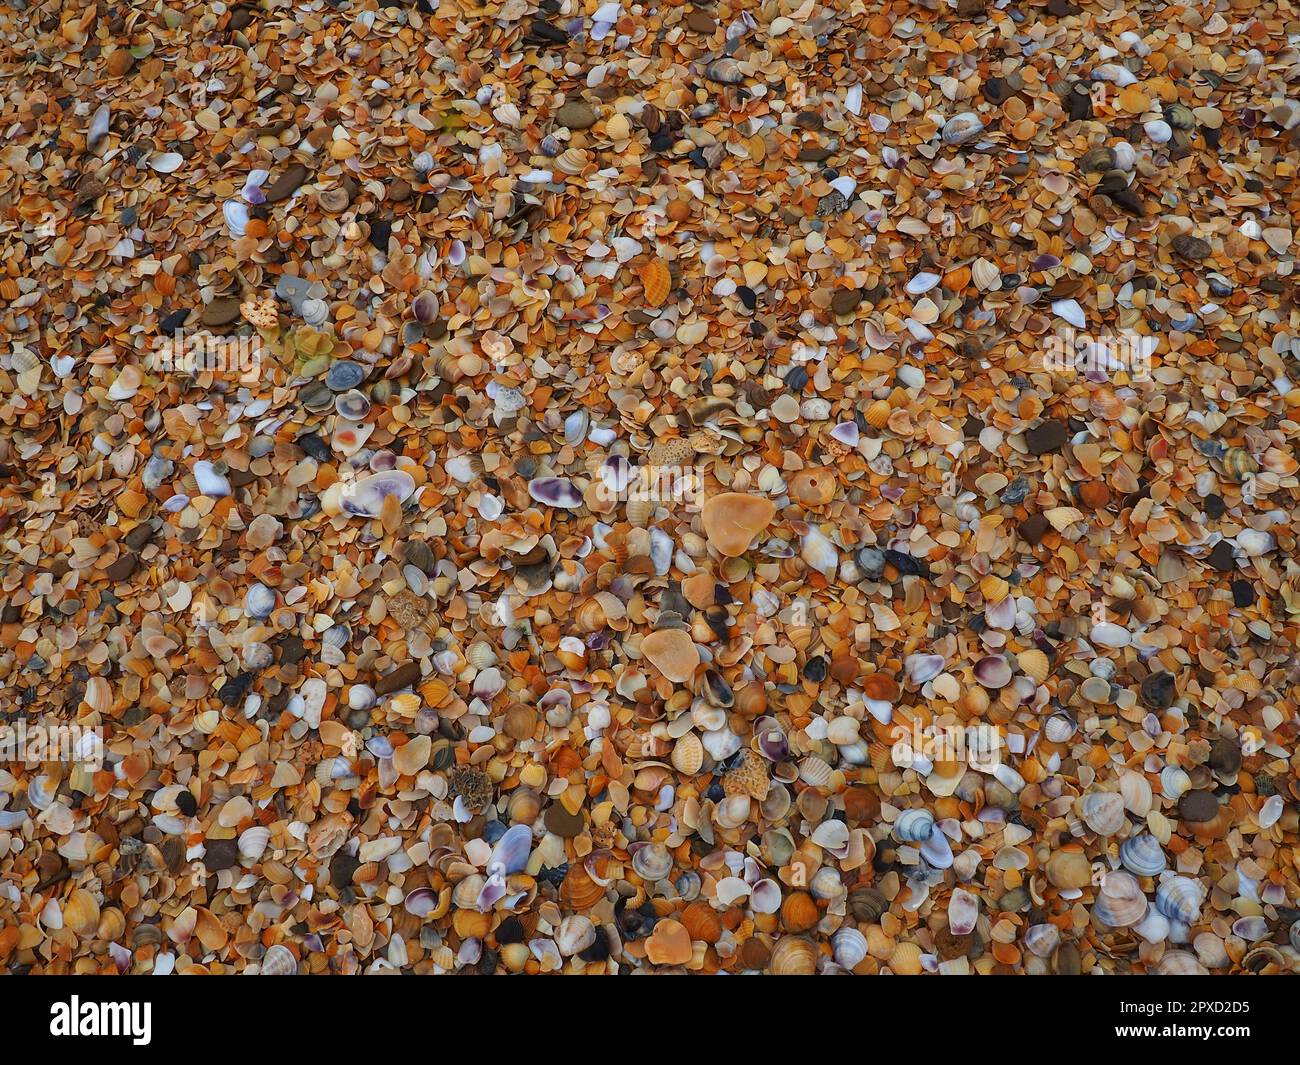 Shells from gastropods of bivalve molluscs living in the Azov and Black seas. Beige, brown, black, white seashells on the shore. The village of Golubi Stock Photo